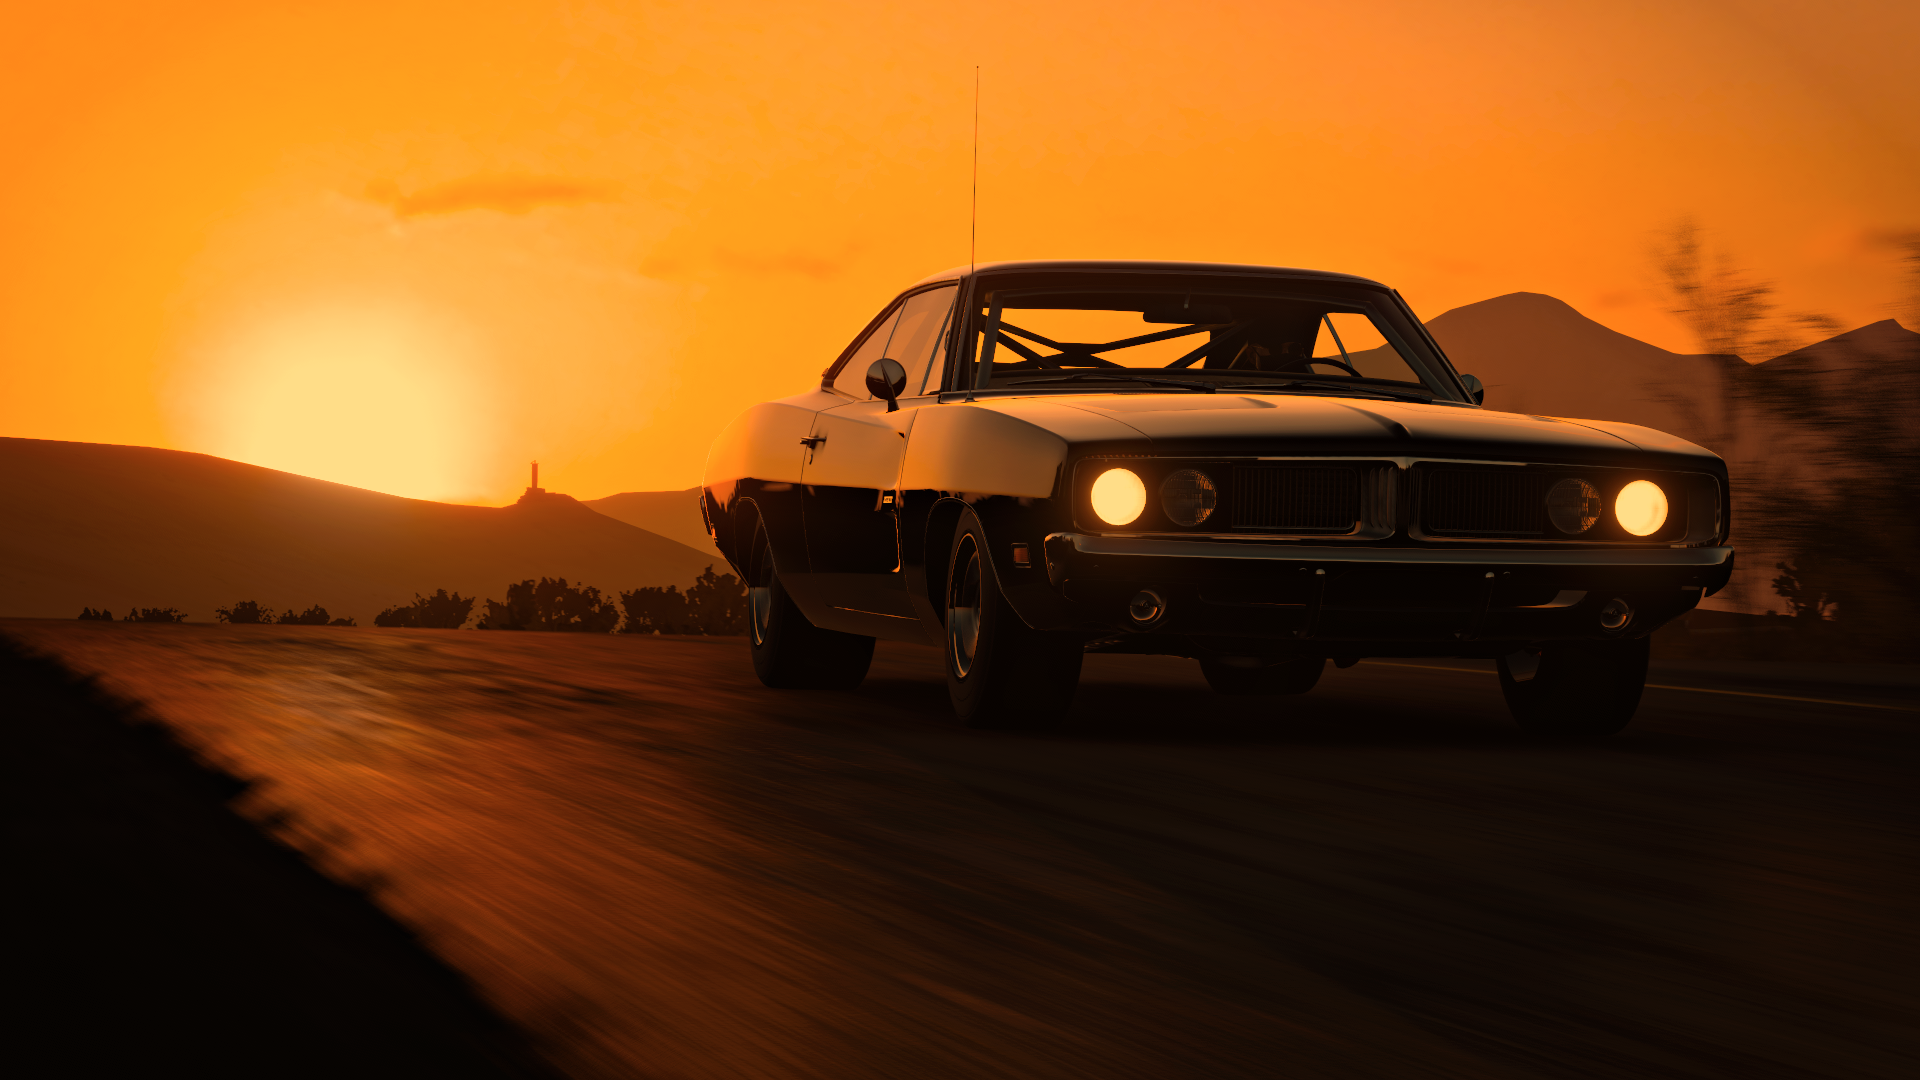 General 1920x1080 Forza Forza Horizon 5 orange dark Sun black road car Dodge Charger Dodge muscle cars American cars PlaygroundGames vehicle video games headlights frontal view sunset sunset glow sunlight motion blur blurred sky video game art